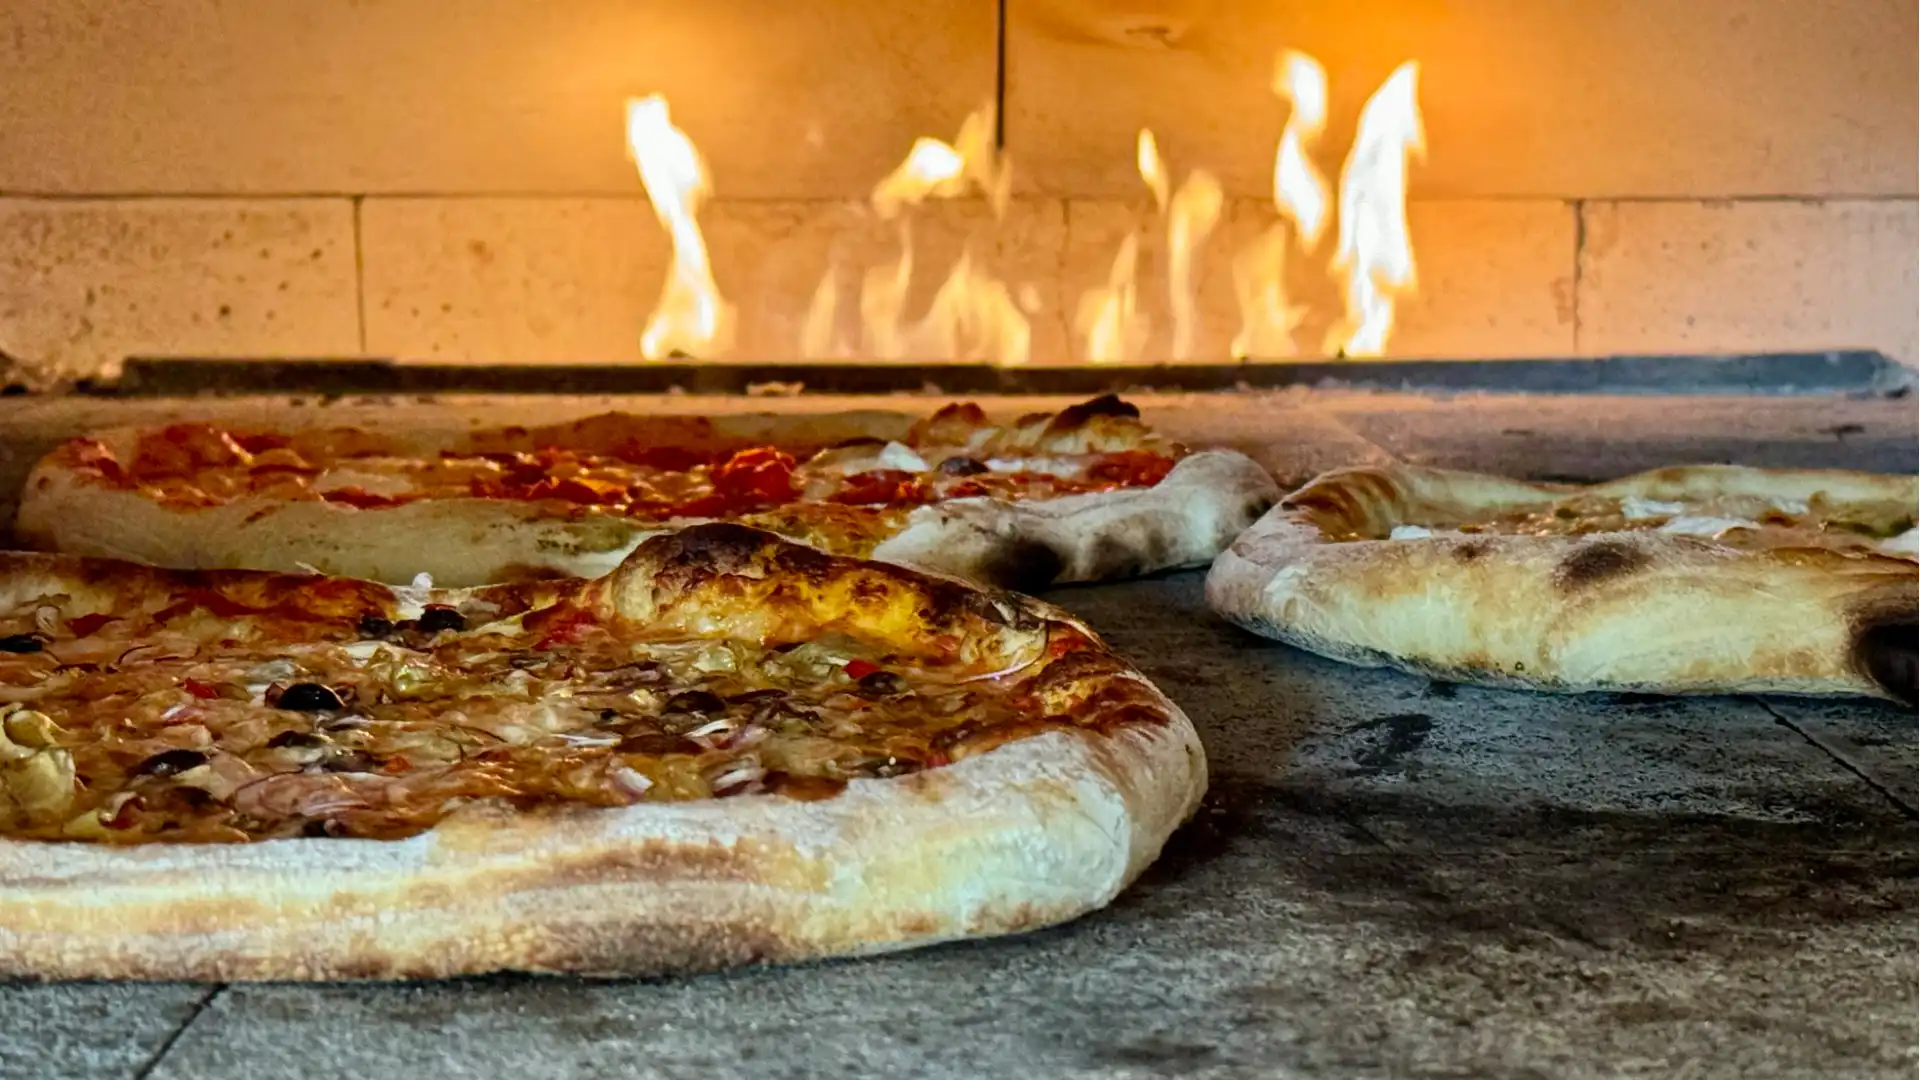 handcrafted pizza in a brick oven with flames in the background